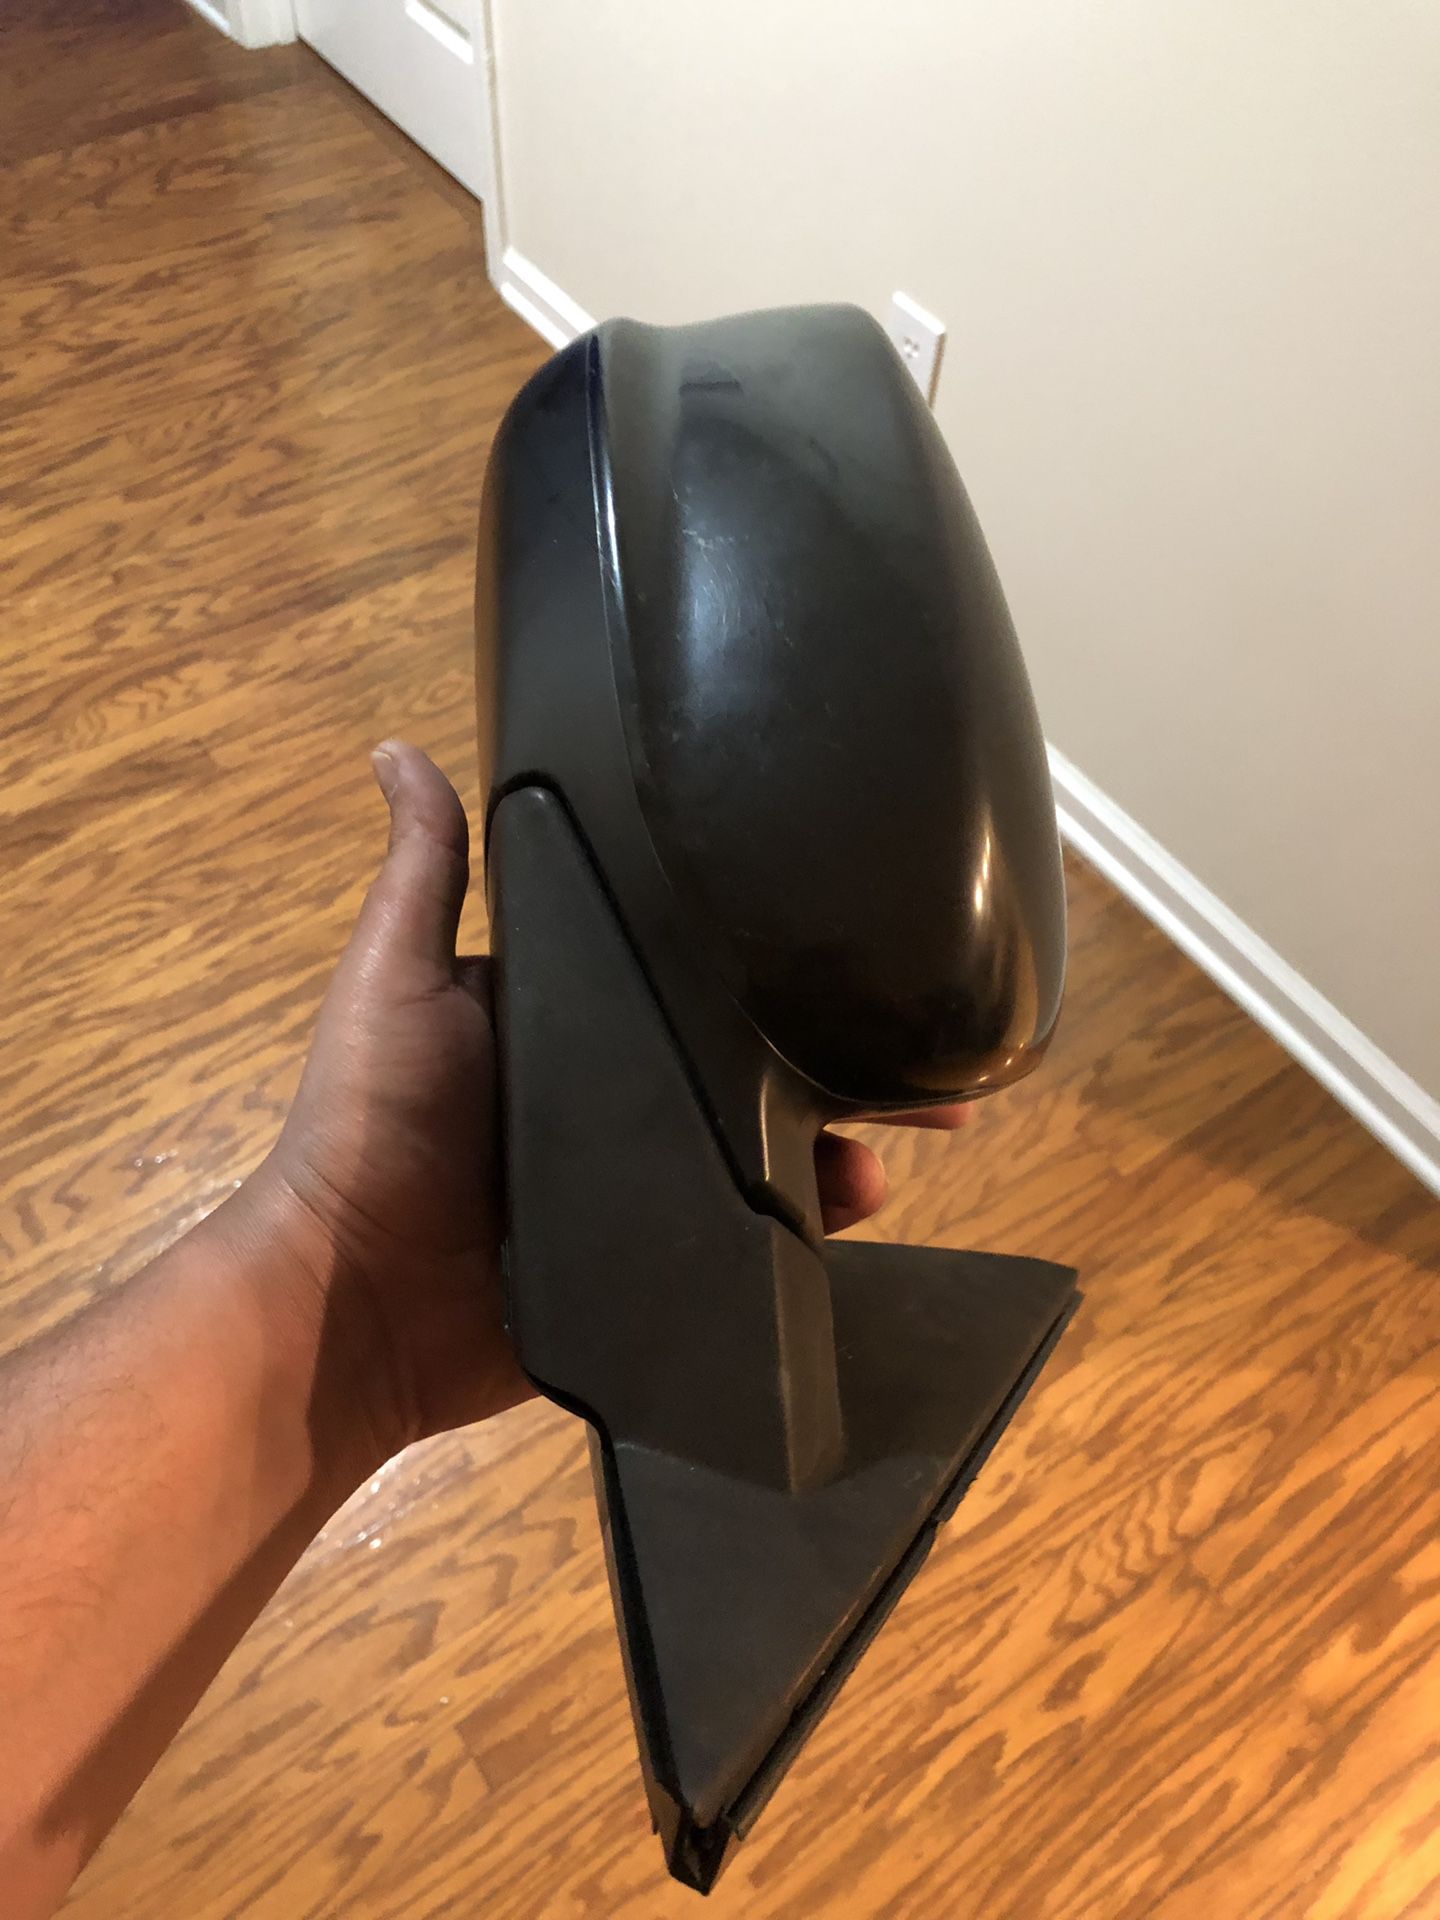 Honda Accord 2008 to 2012 Right view side mirror